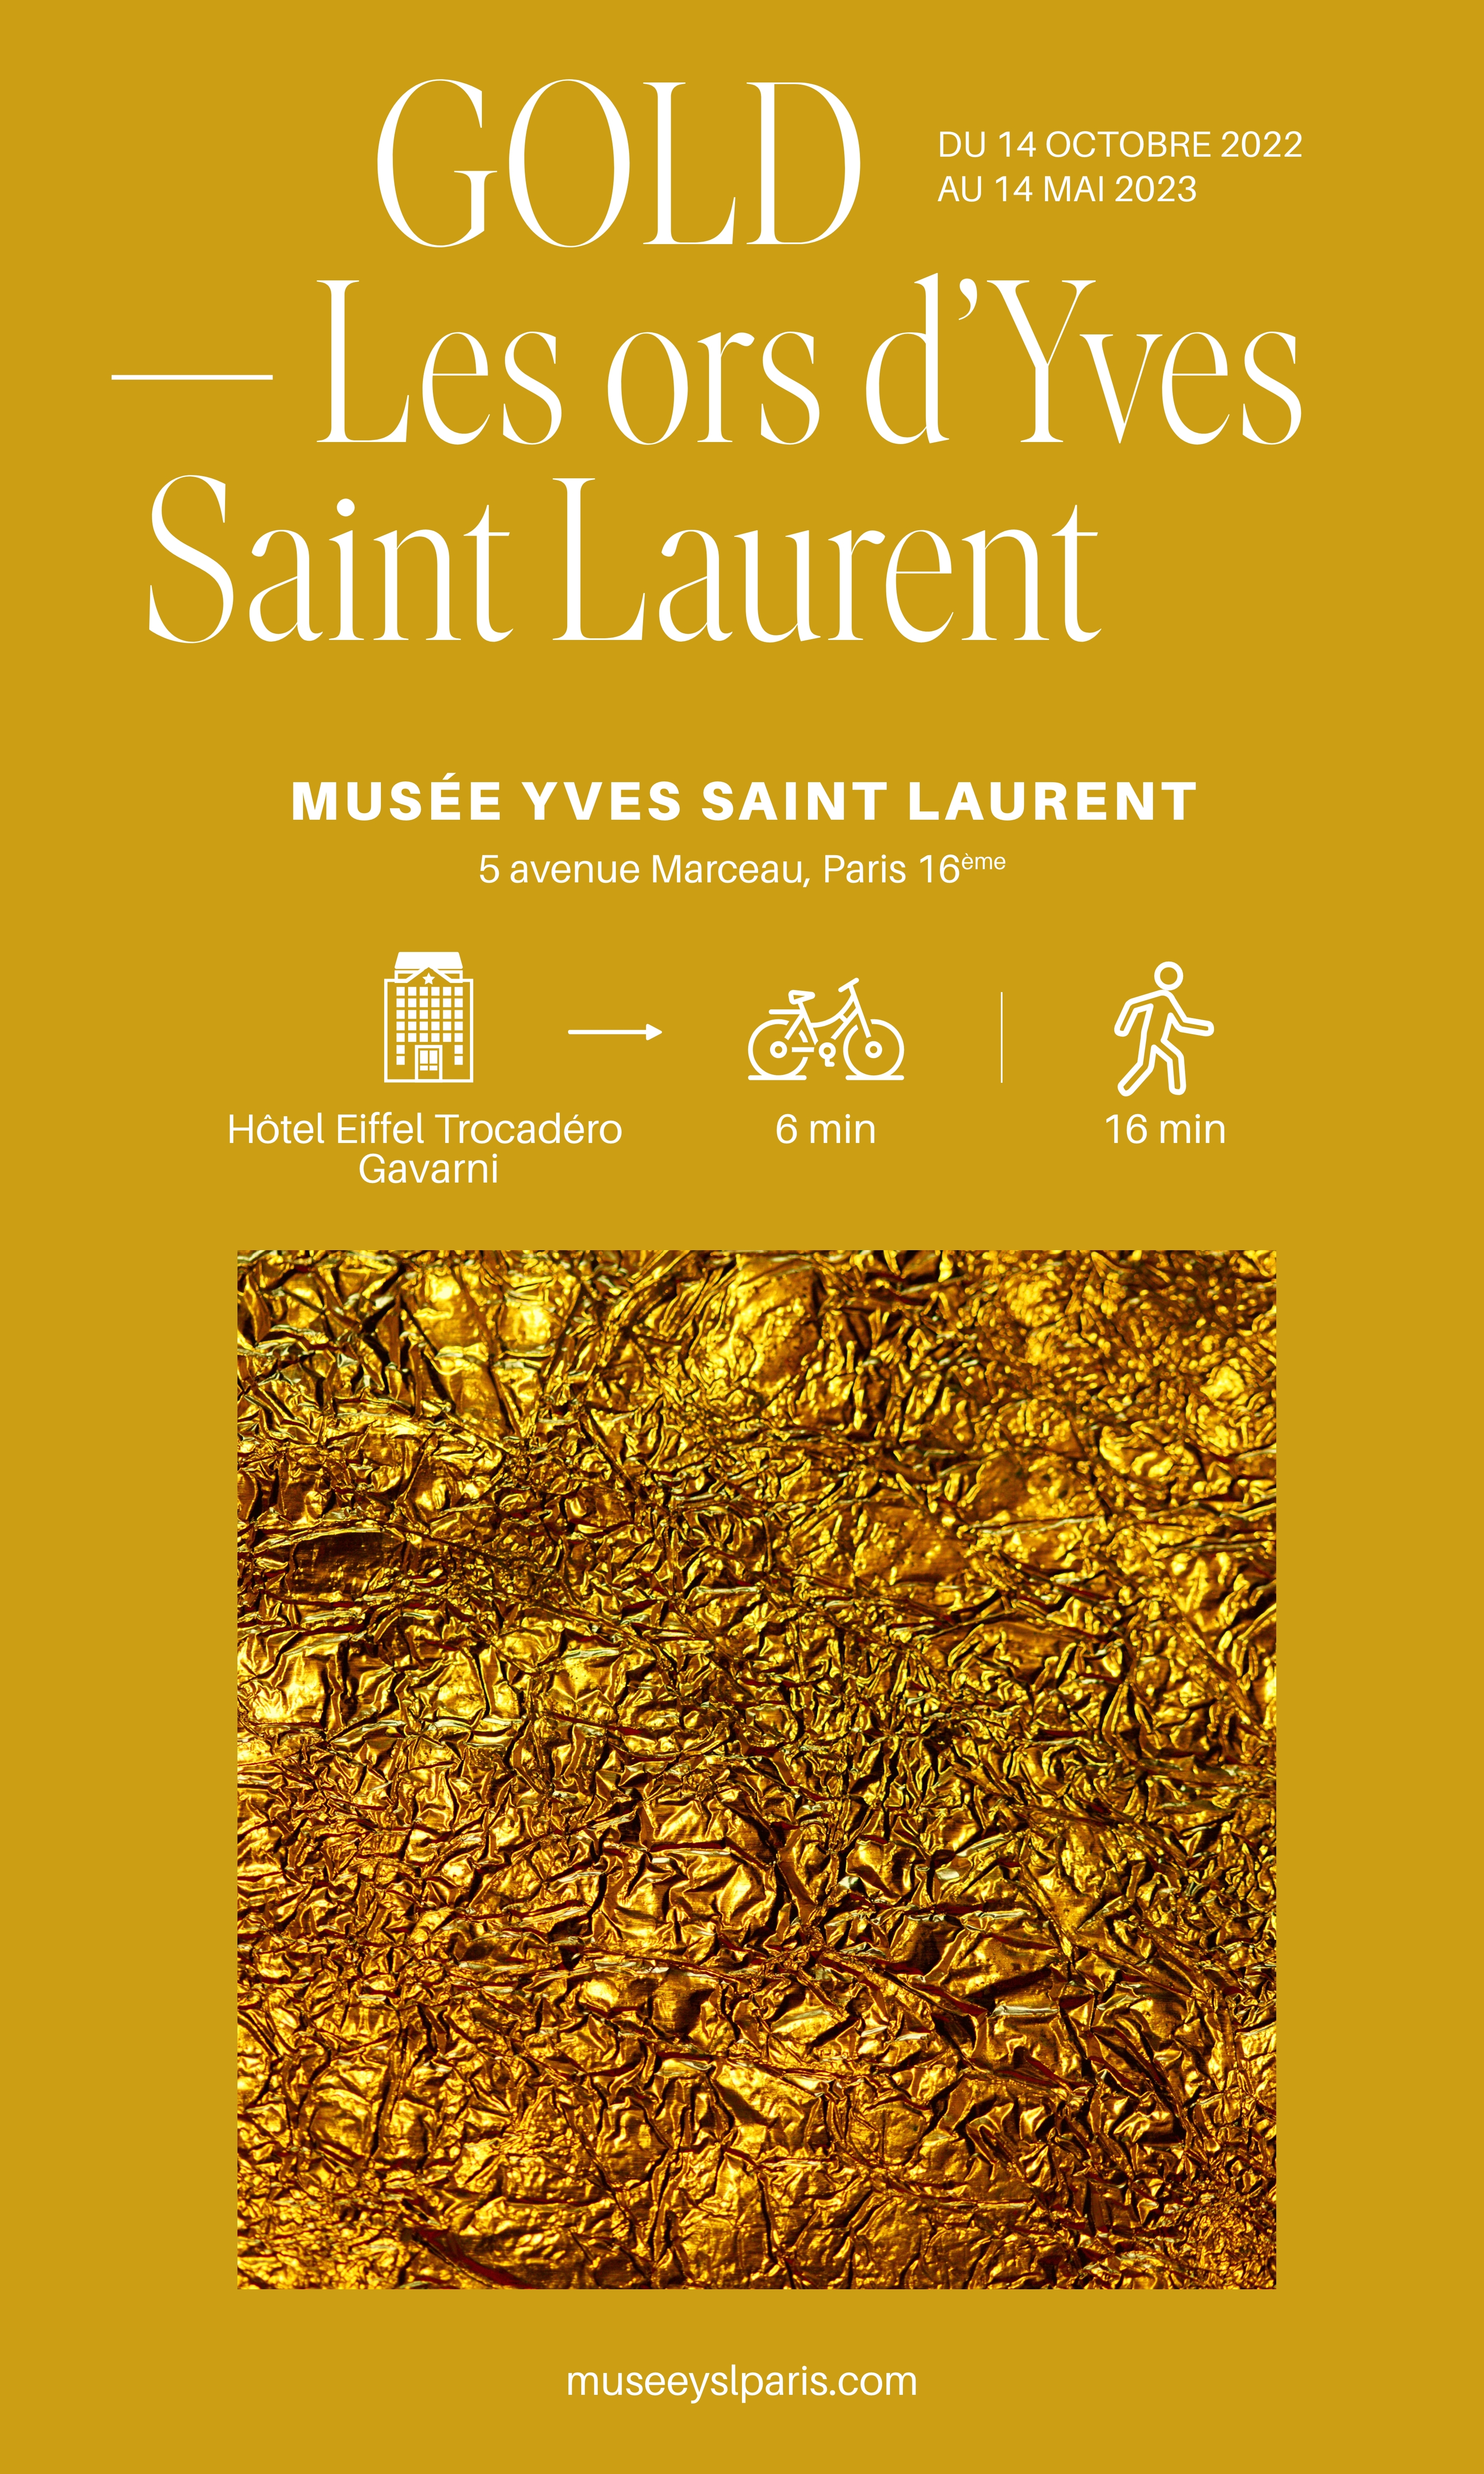 Gold – Gold in Yves Saint Laurent’s creations